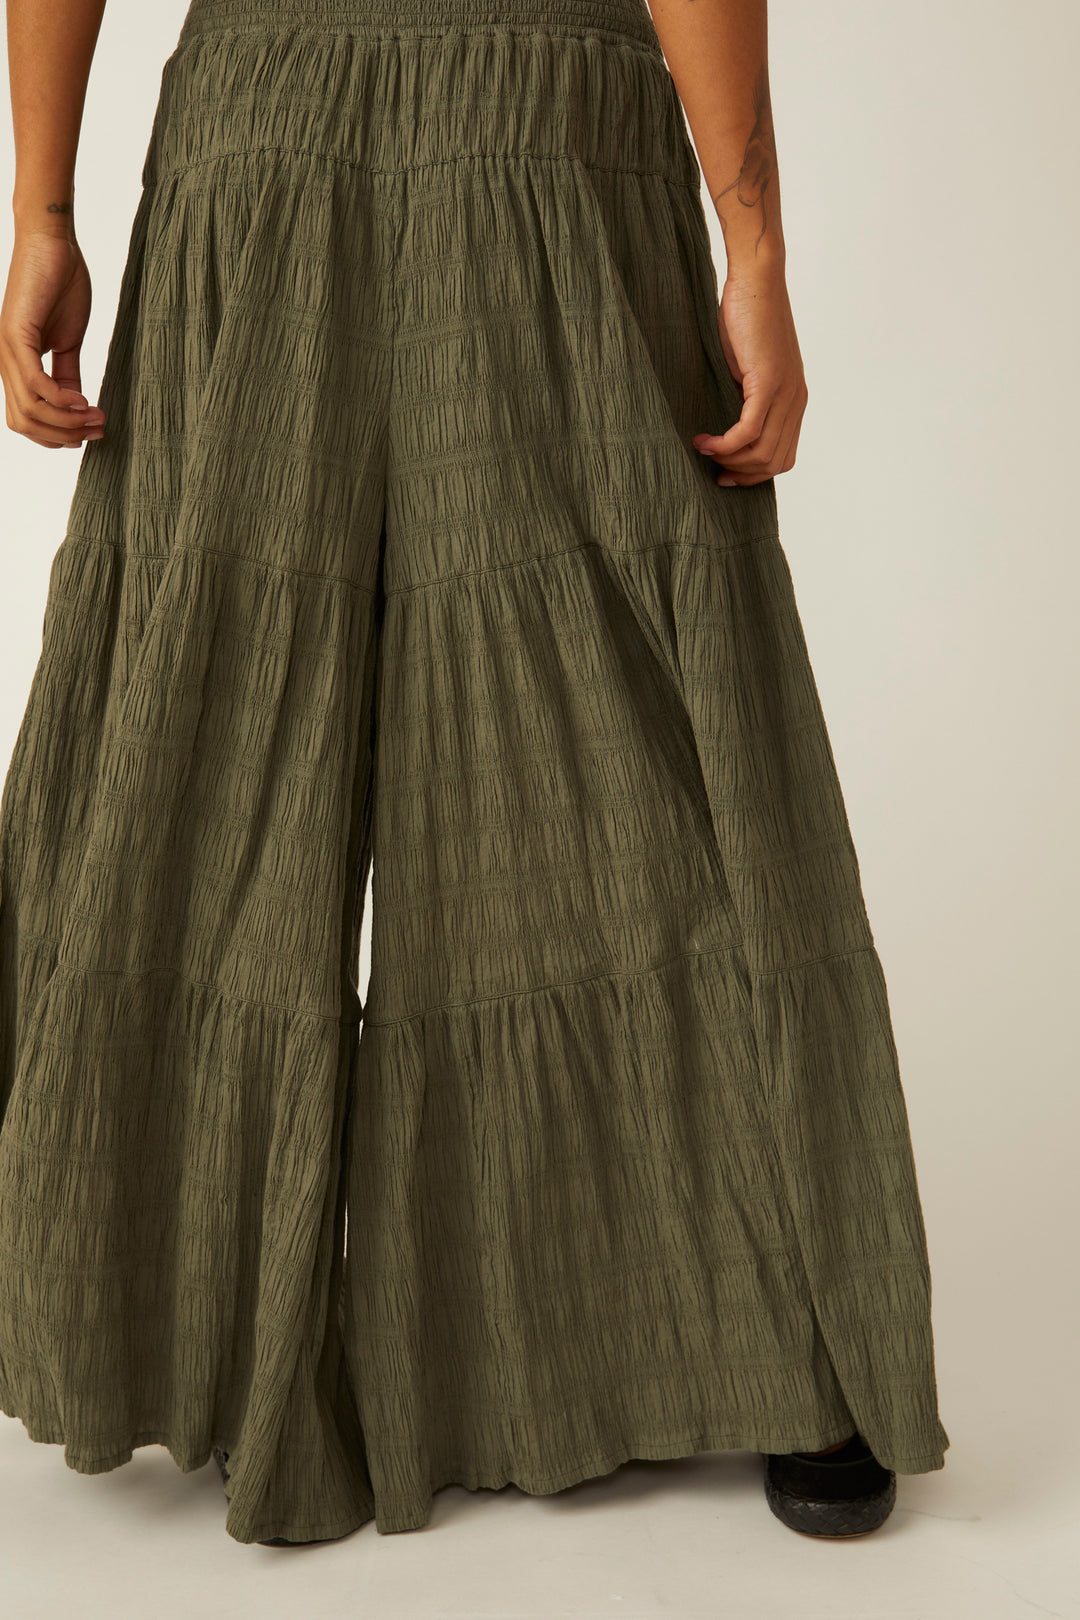 IN PARADISE WIDE LEG PANT-DRIED BASIL